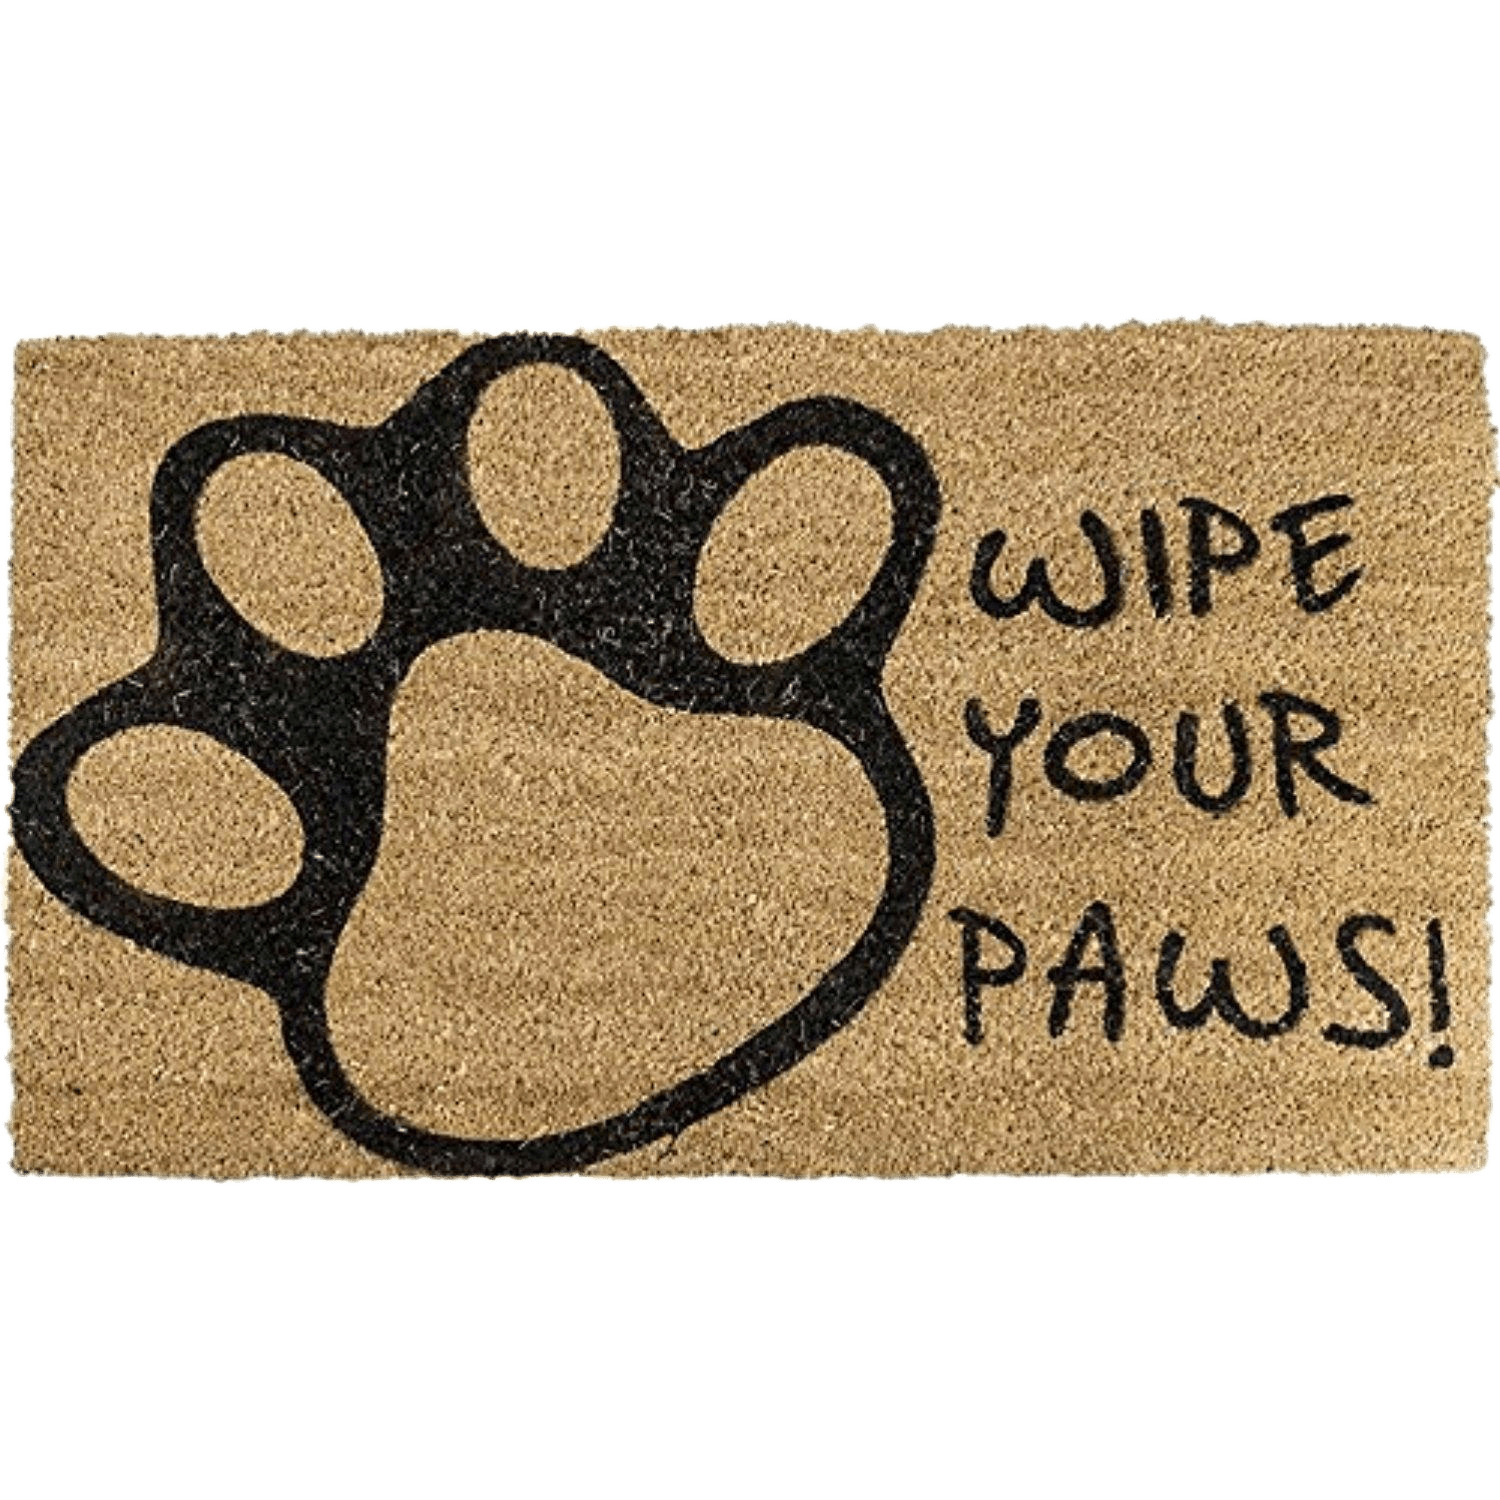 Wipe Your Paws Doormat icons